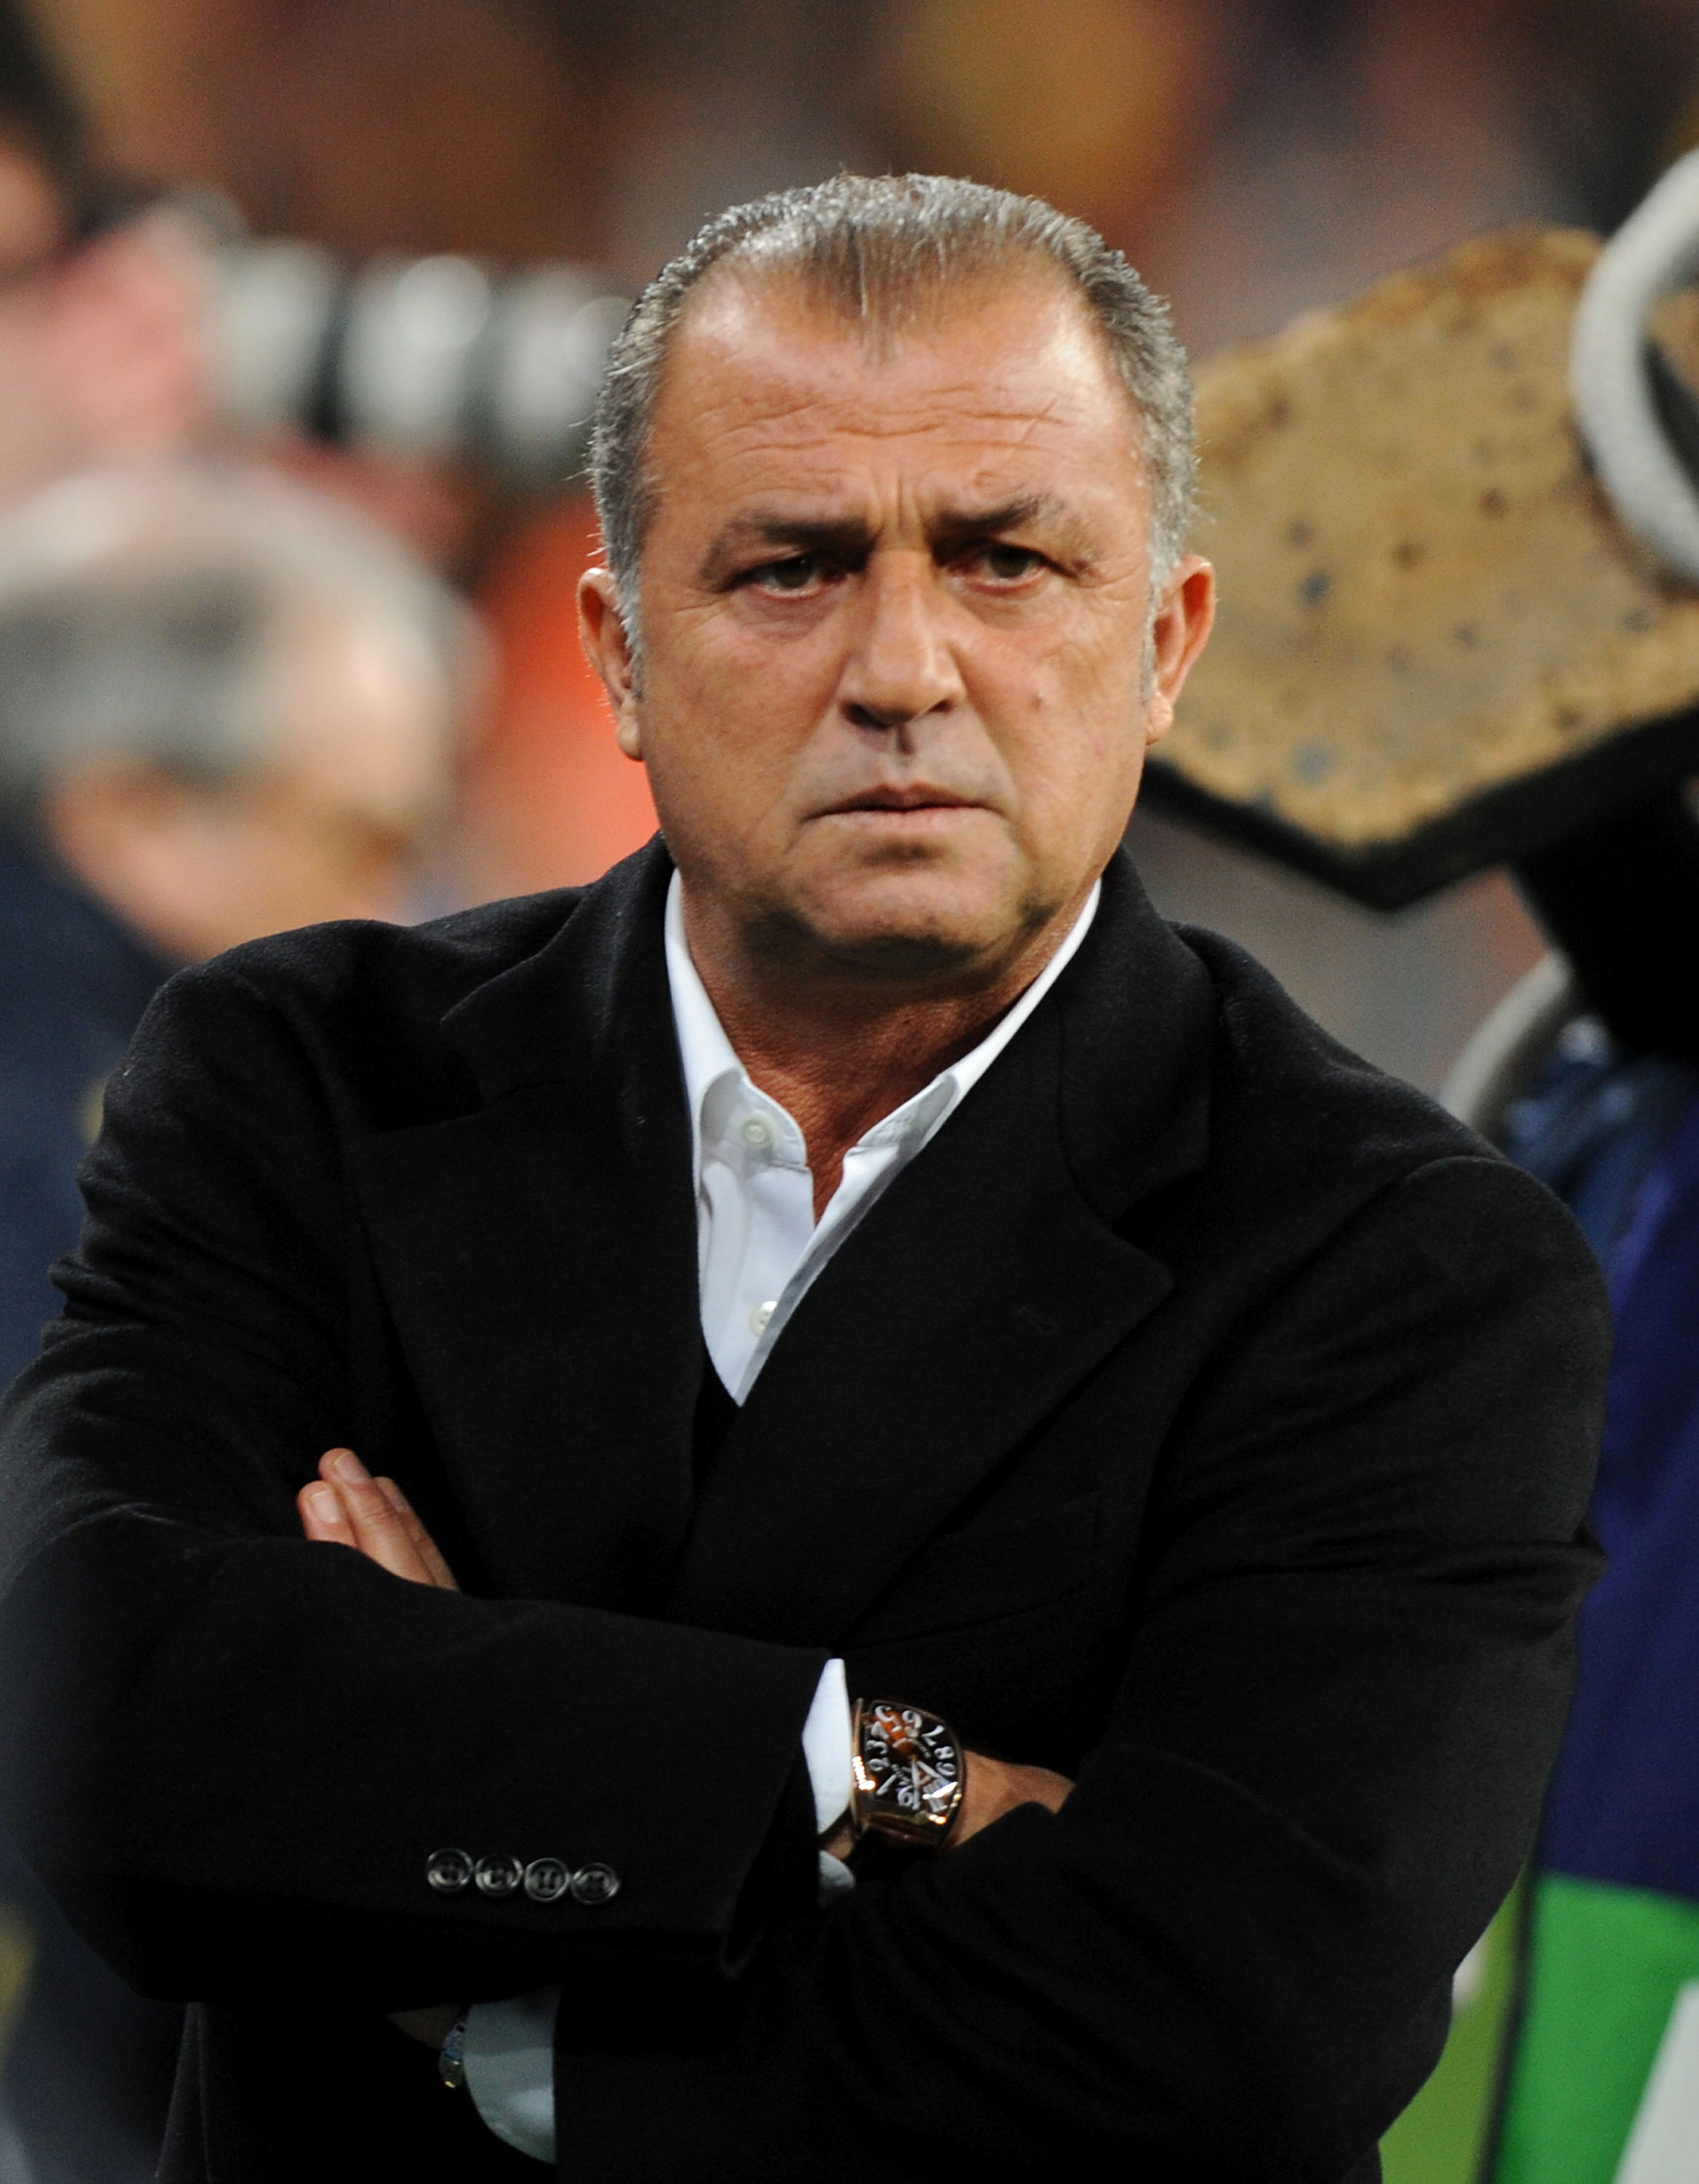 MADRID, SPAIN - MARCH 28:  Turkish manager Fatih Terim before the start of the FIFA2010 World Cup Qualifier match between Spain and Turkey at the Estadio Santiago Bernabeu on March 28, 2009 in Madrid, Spain.  (Photo by Denis Doyle/Getty Images)